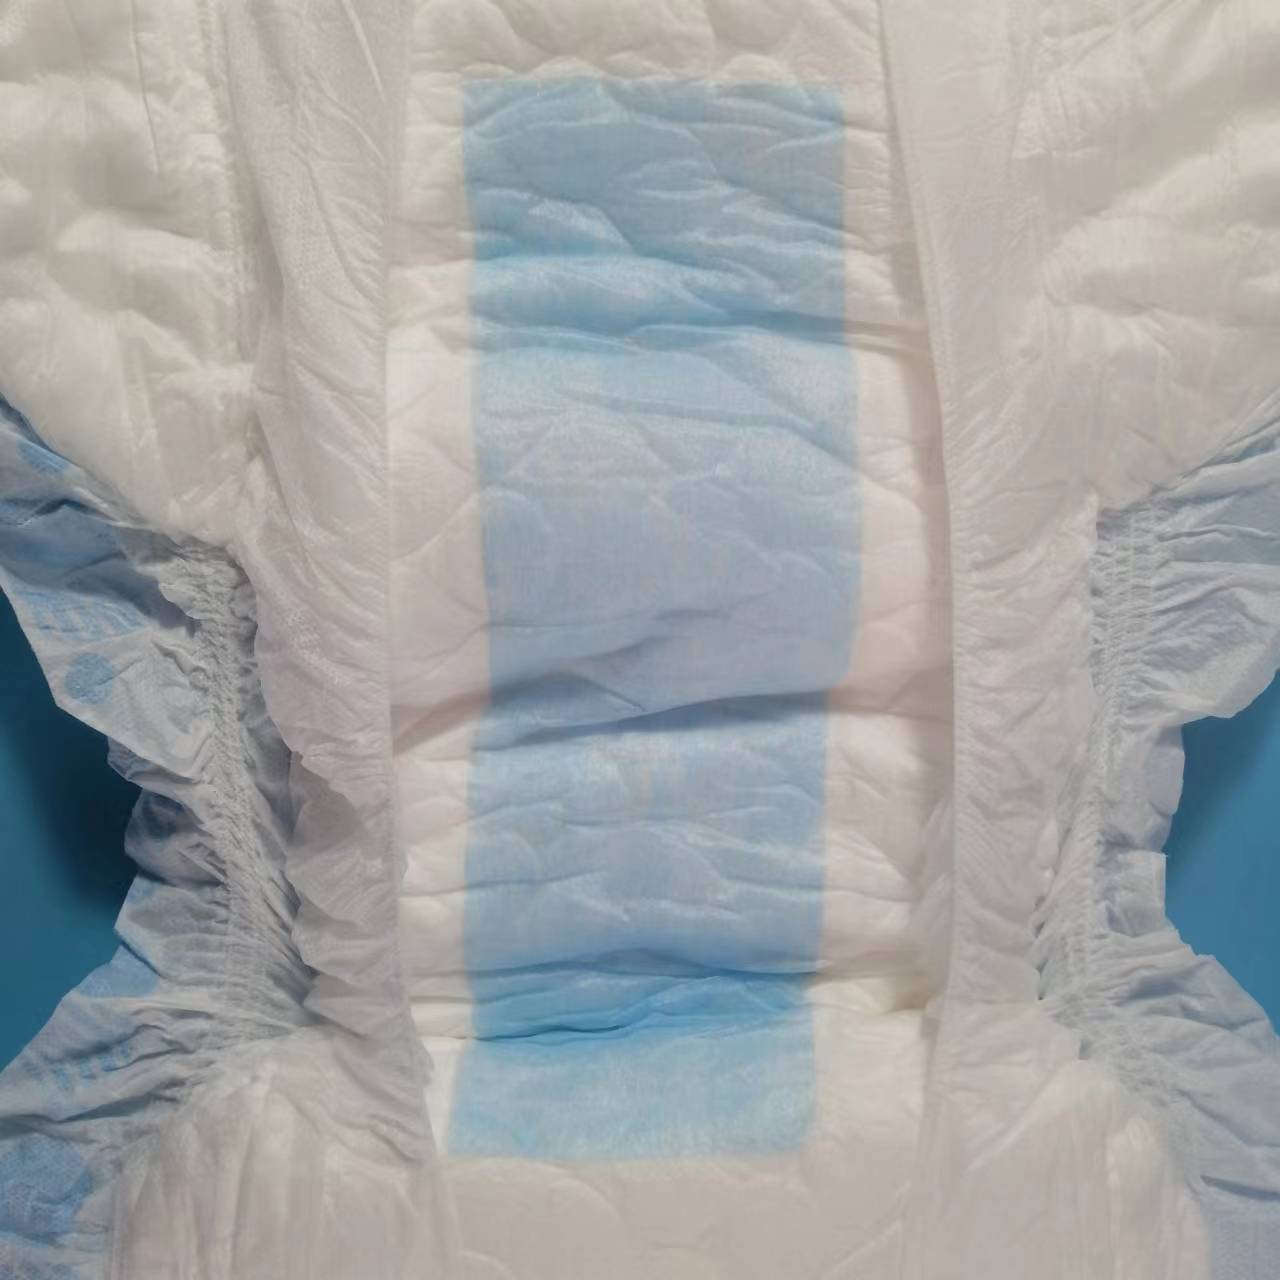 Disposable and Customized Adult Diapers with High Absorption to